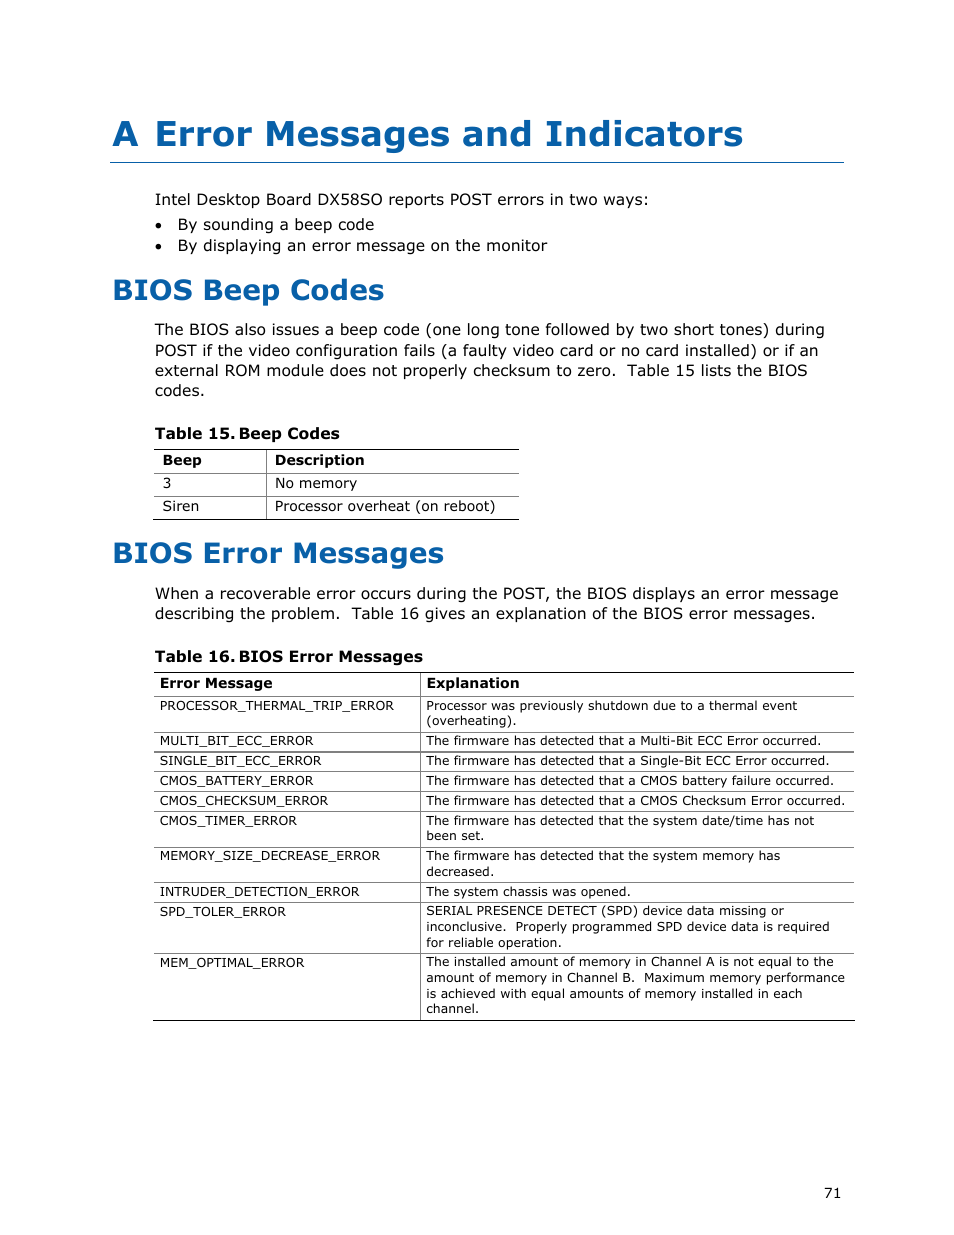 A error messages and indicators, Bios beep codes, Bios error messages |  Intel DX58SO User Manual | Page 71 / 86